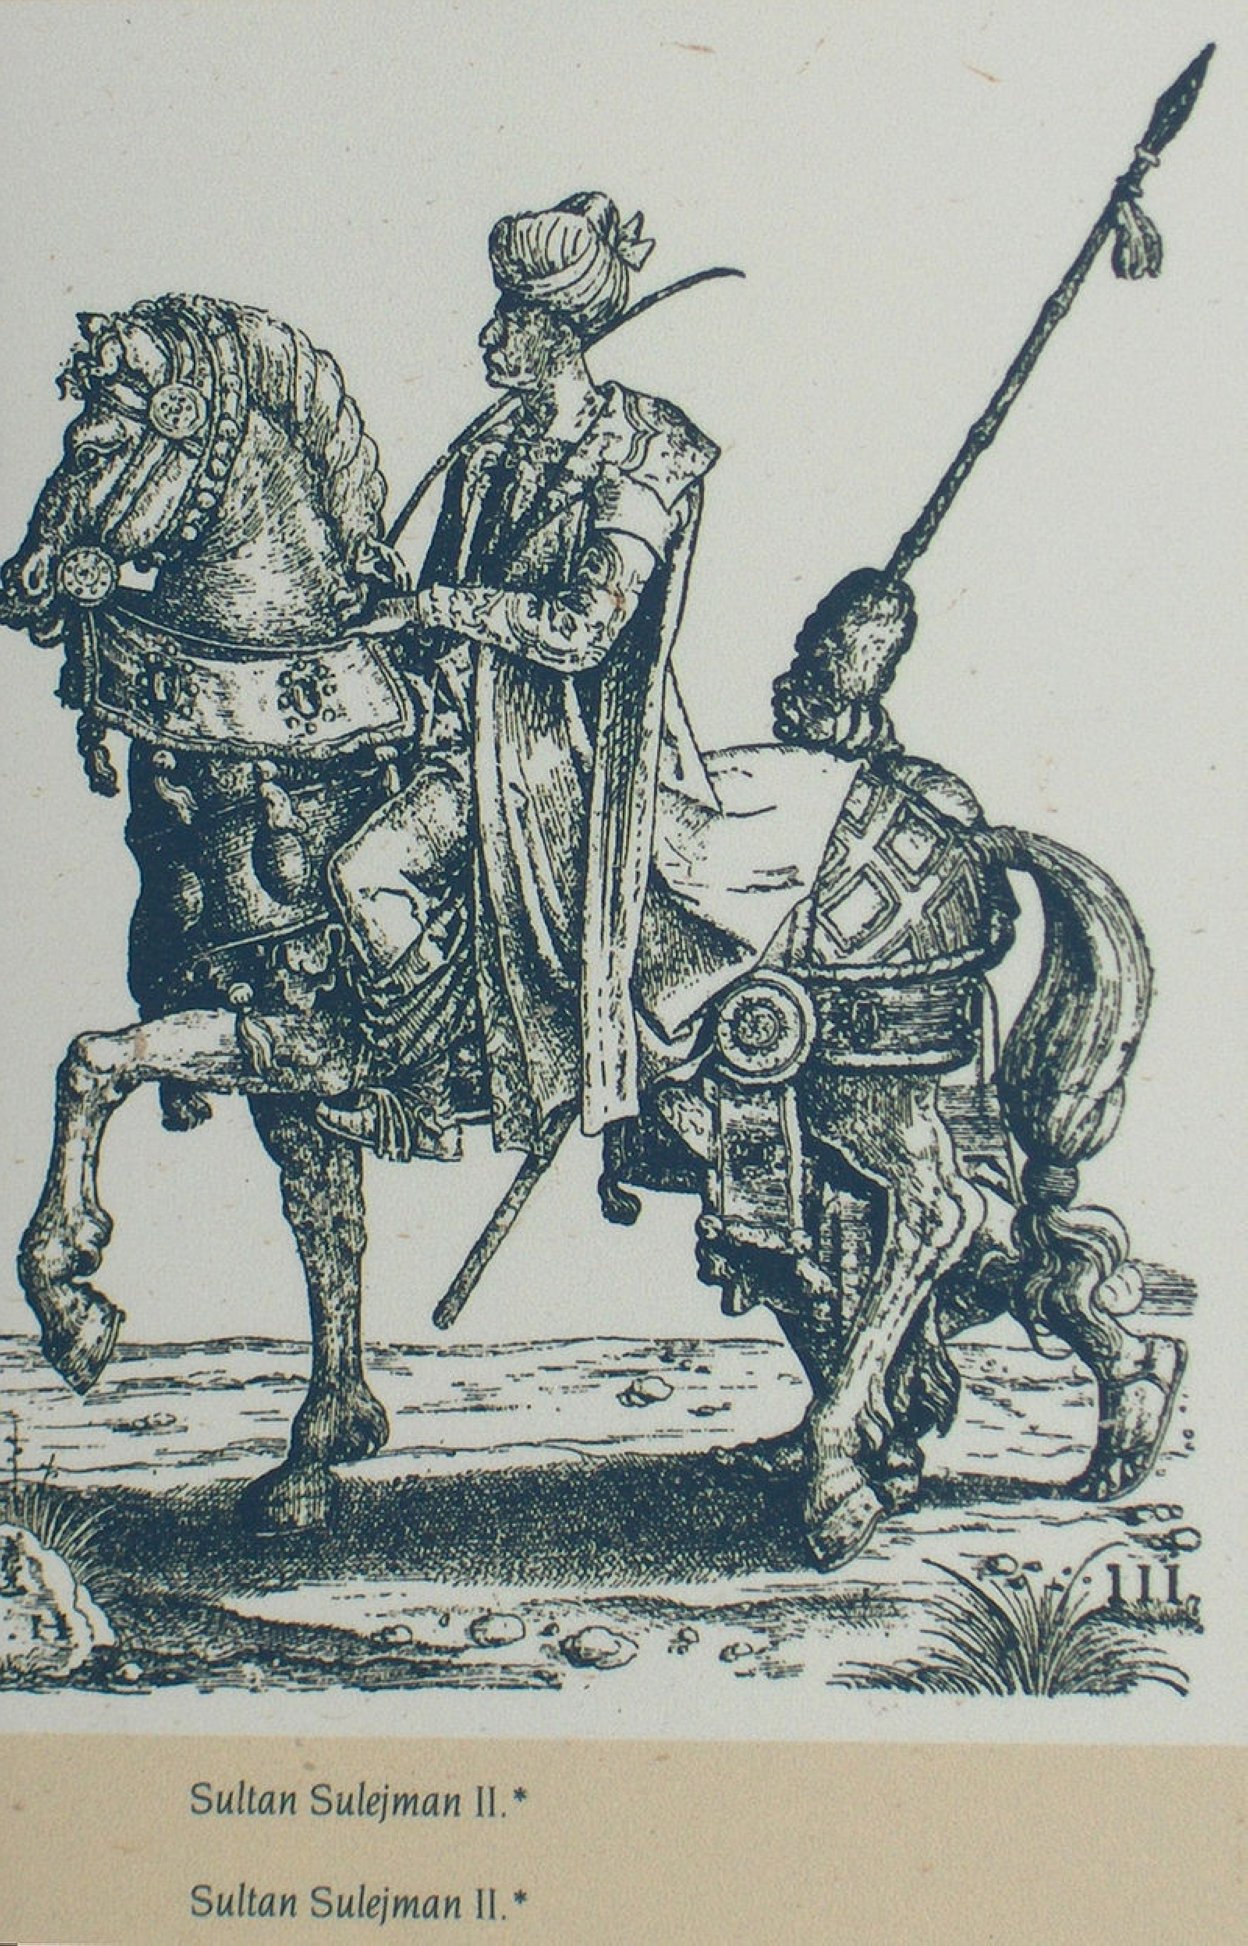 A depiction of Sultan Suleiman II mounted on a horse. 